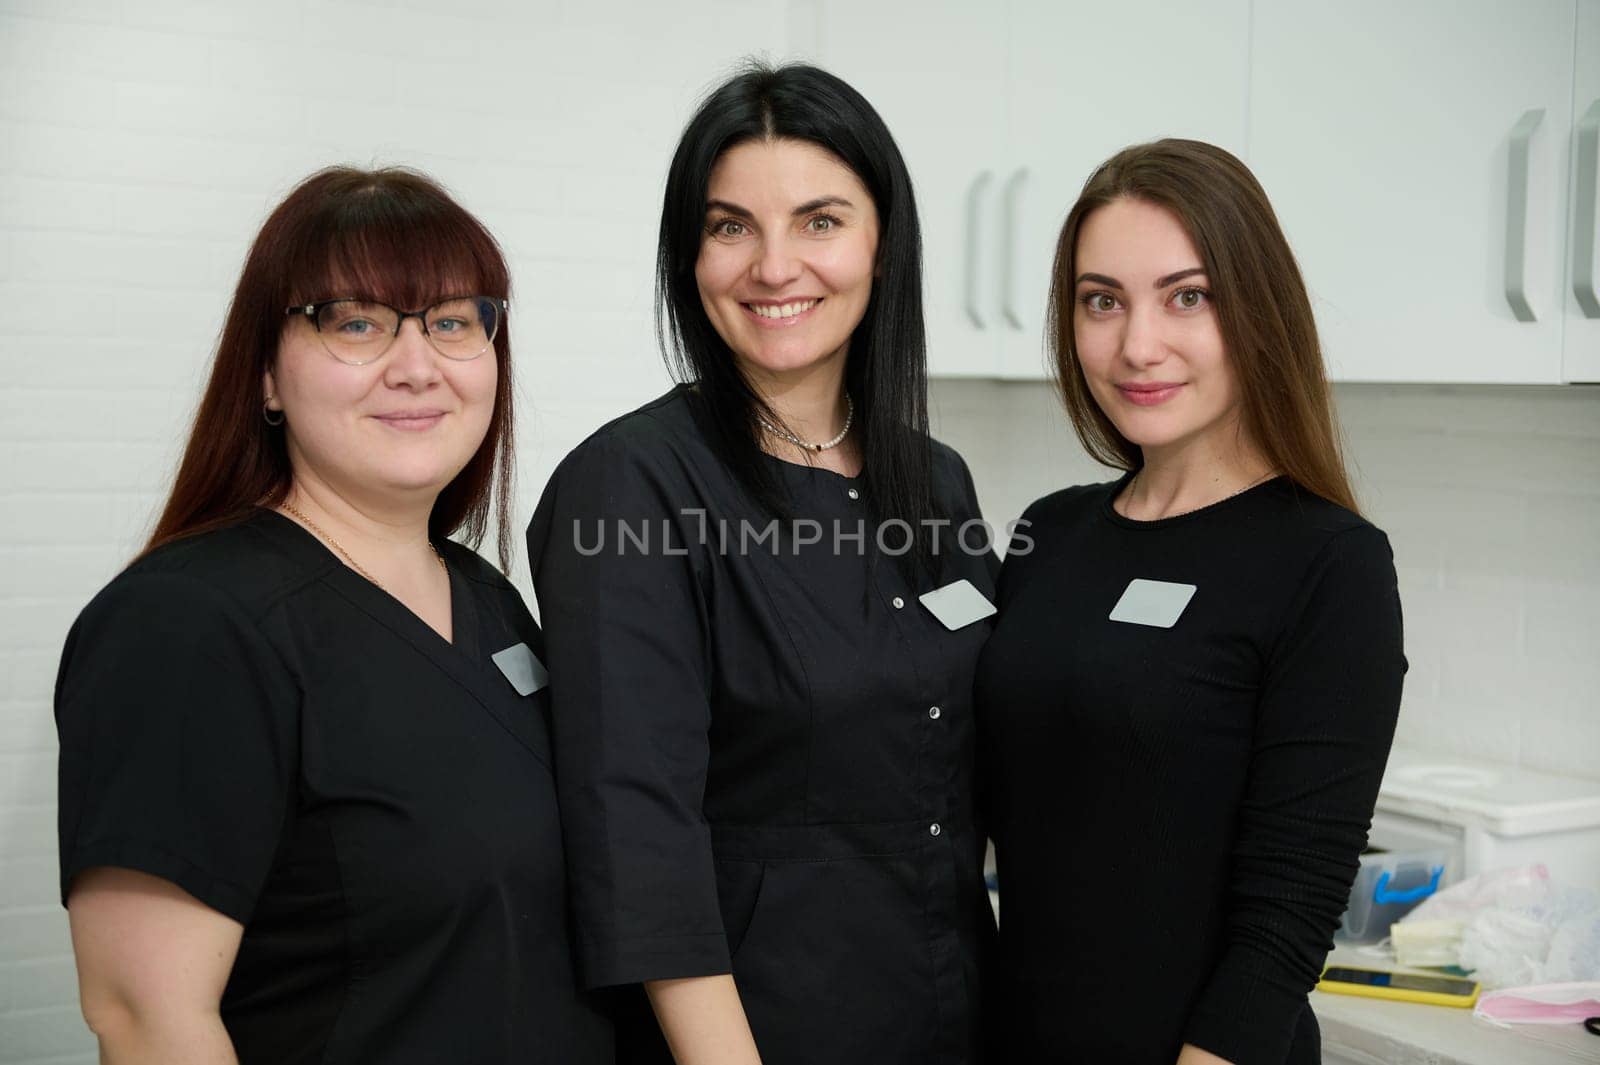 Experienced happy team of female dentists doctors, dental hygienists in stylish black medical uniform, smiling at camera by artgf